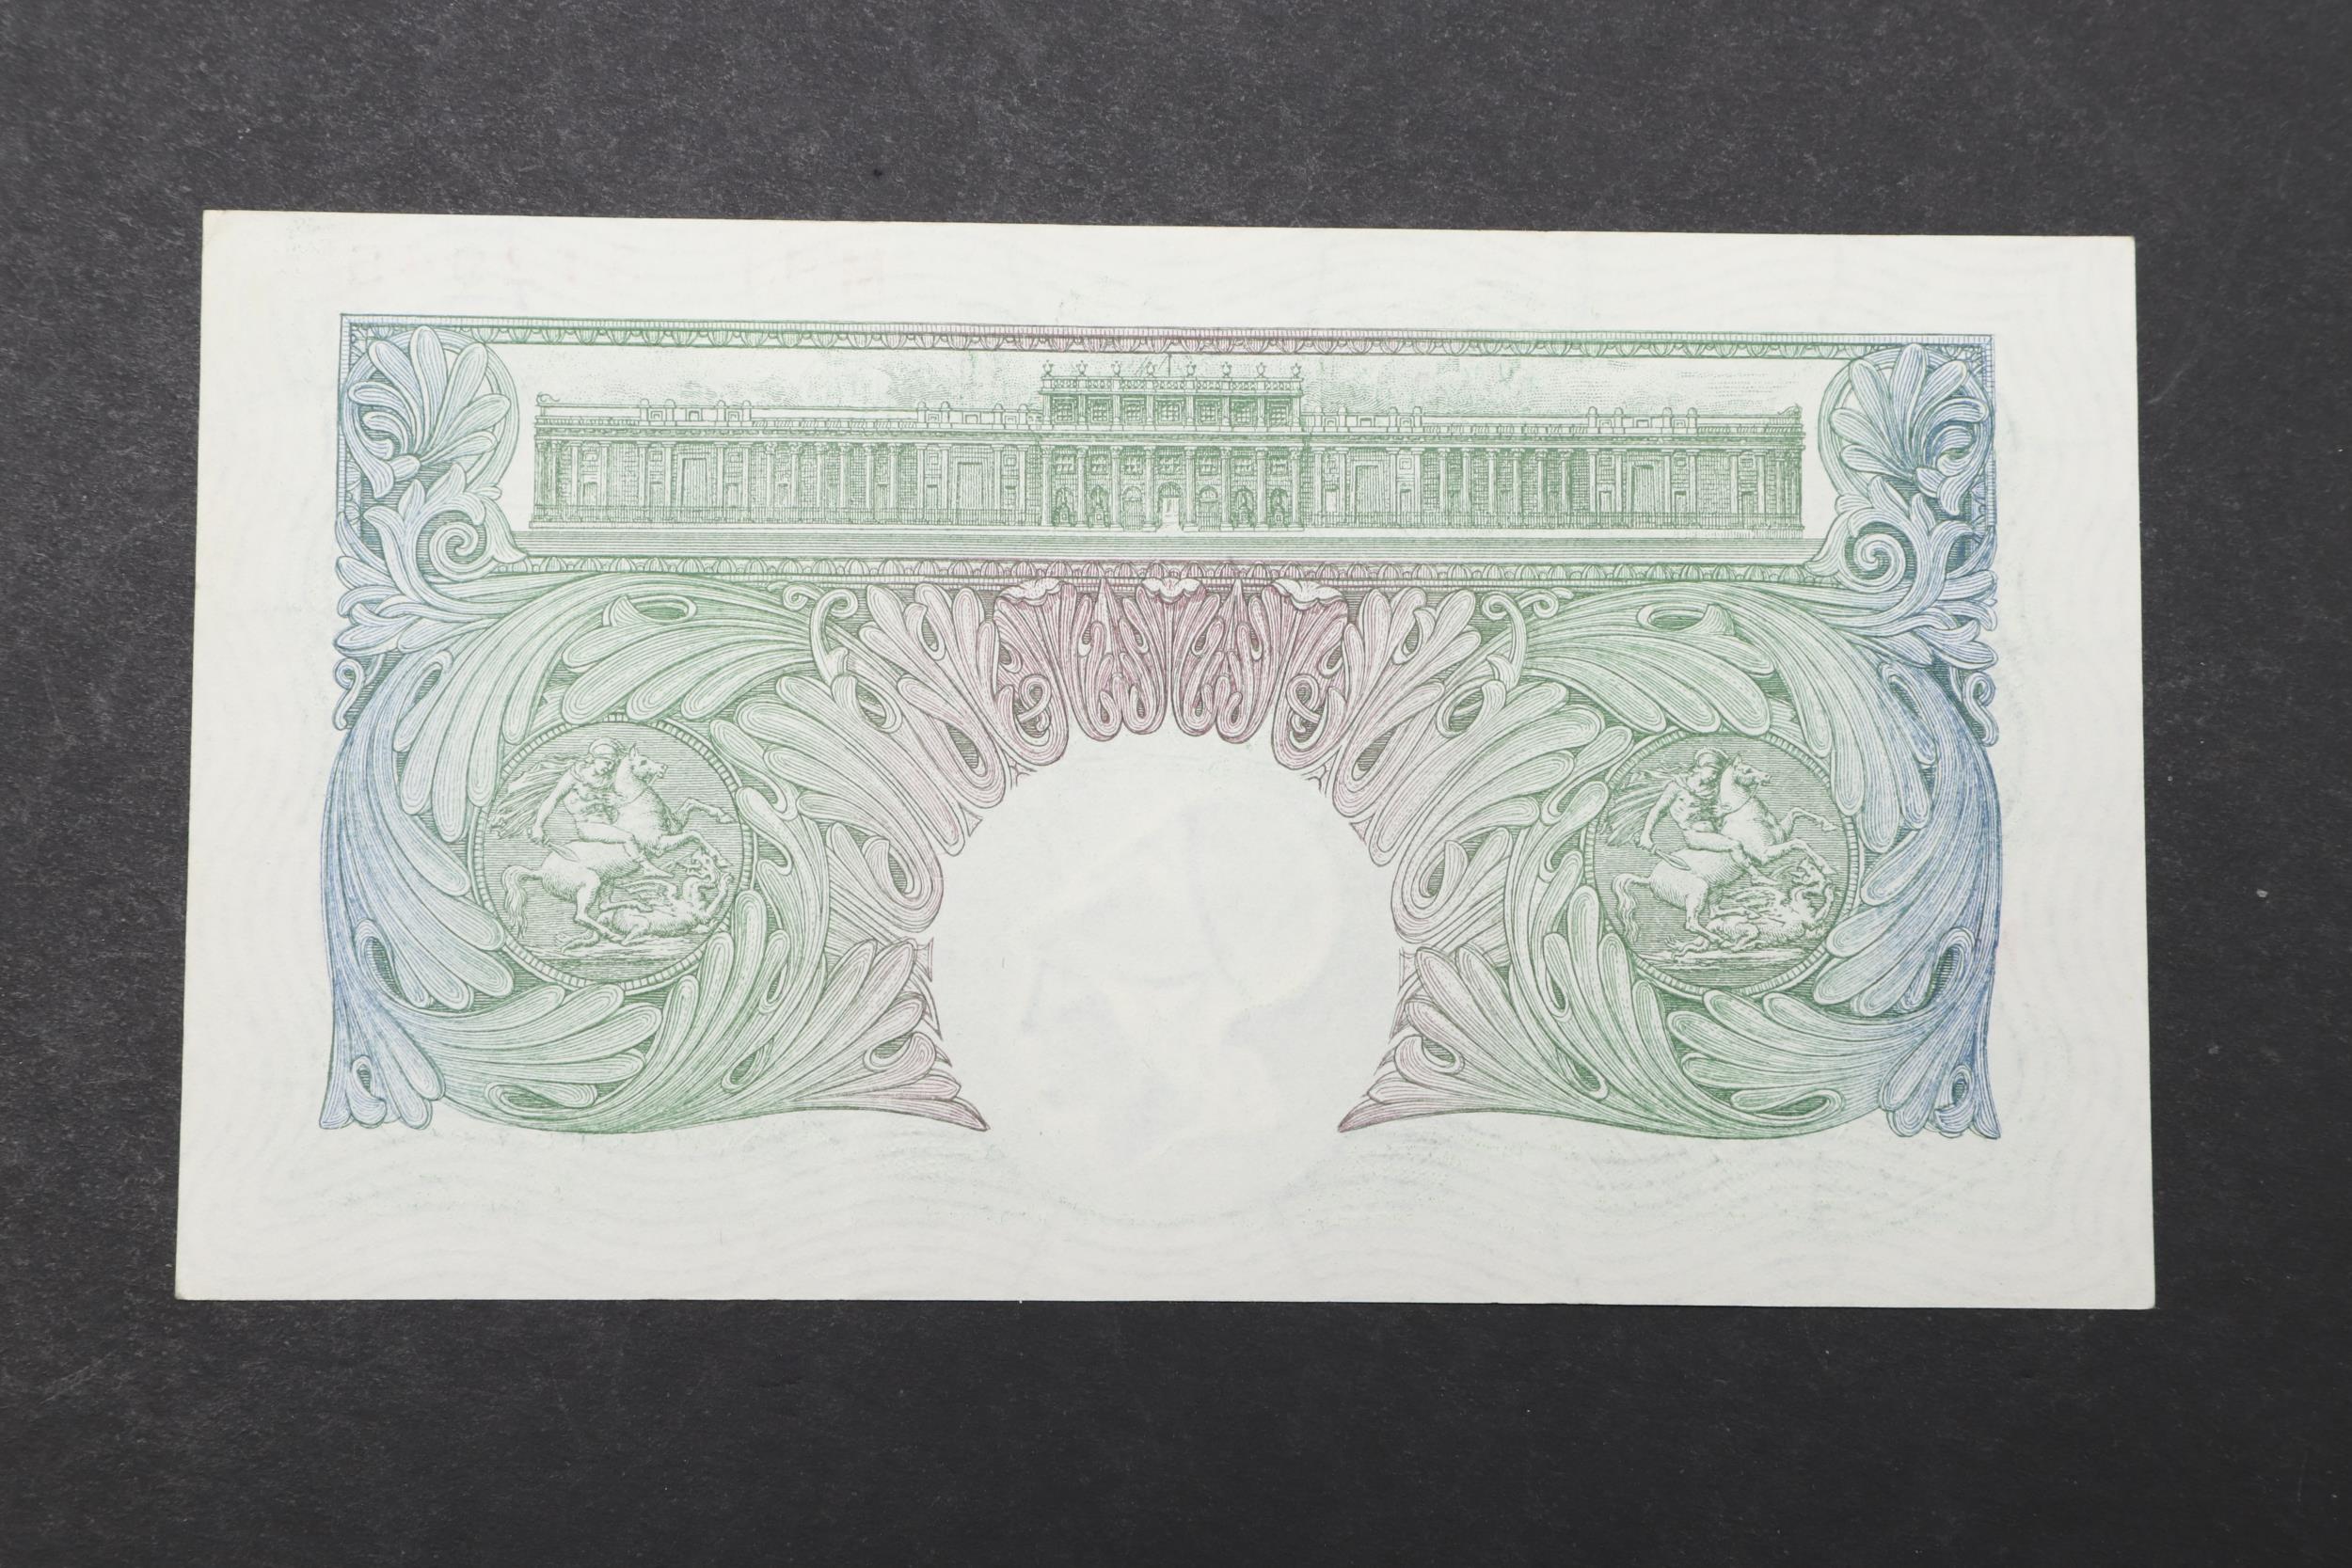 A BANK OF ENGLAND SERIES 'A' ONE POUND NOTE. - Image 2 of 2